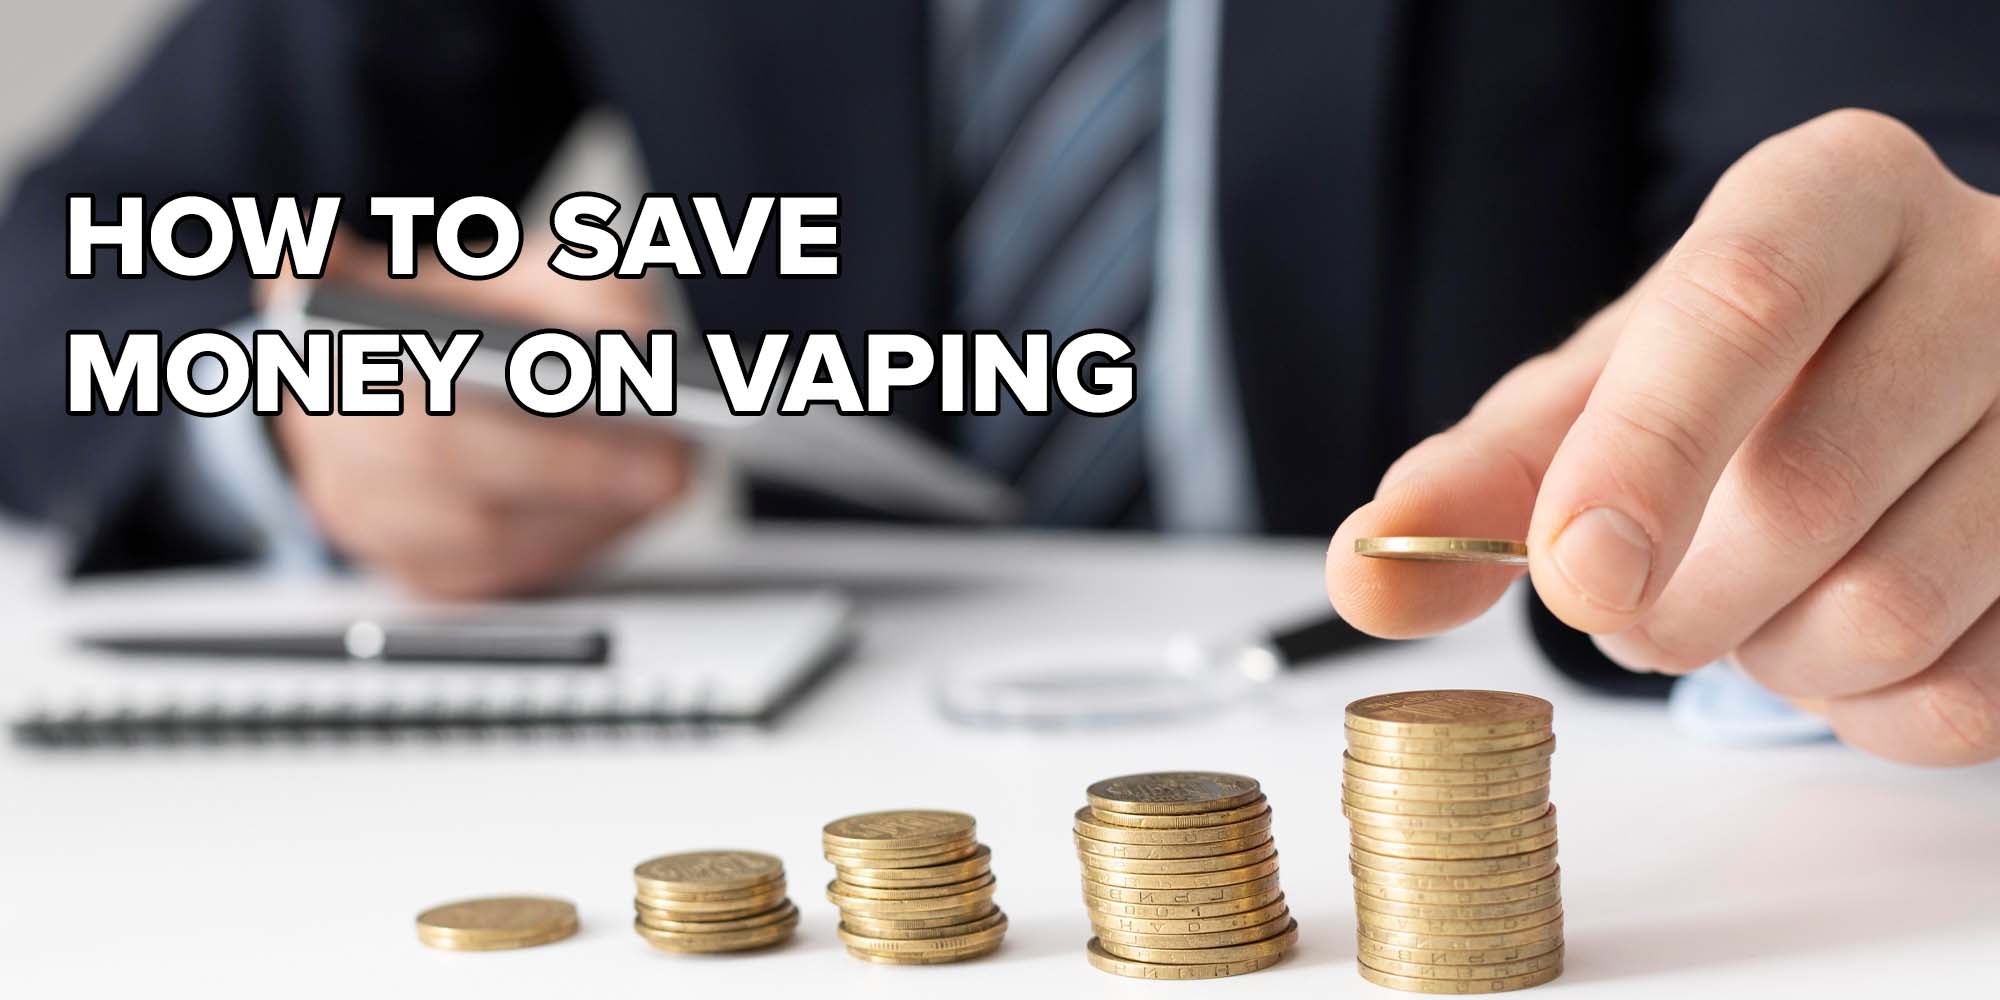 4 Tips on How to Save on Vaping